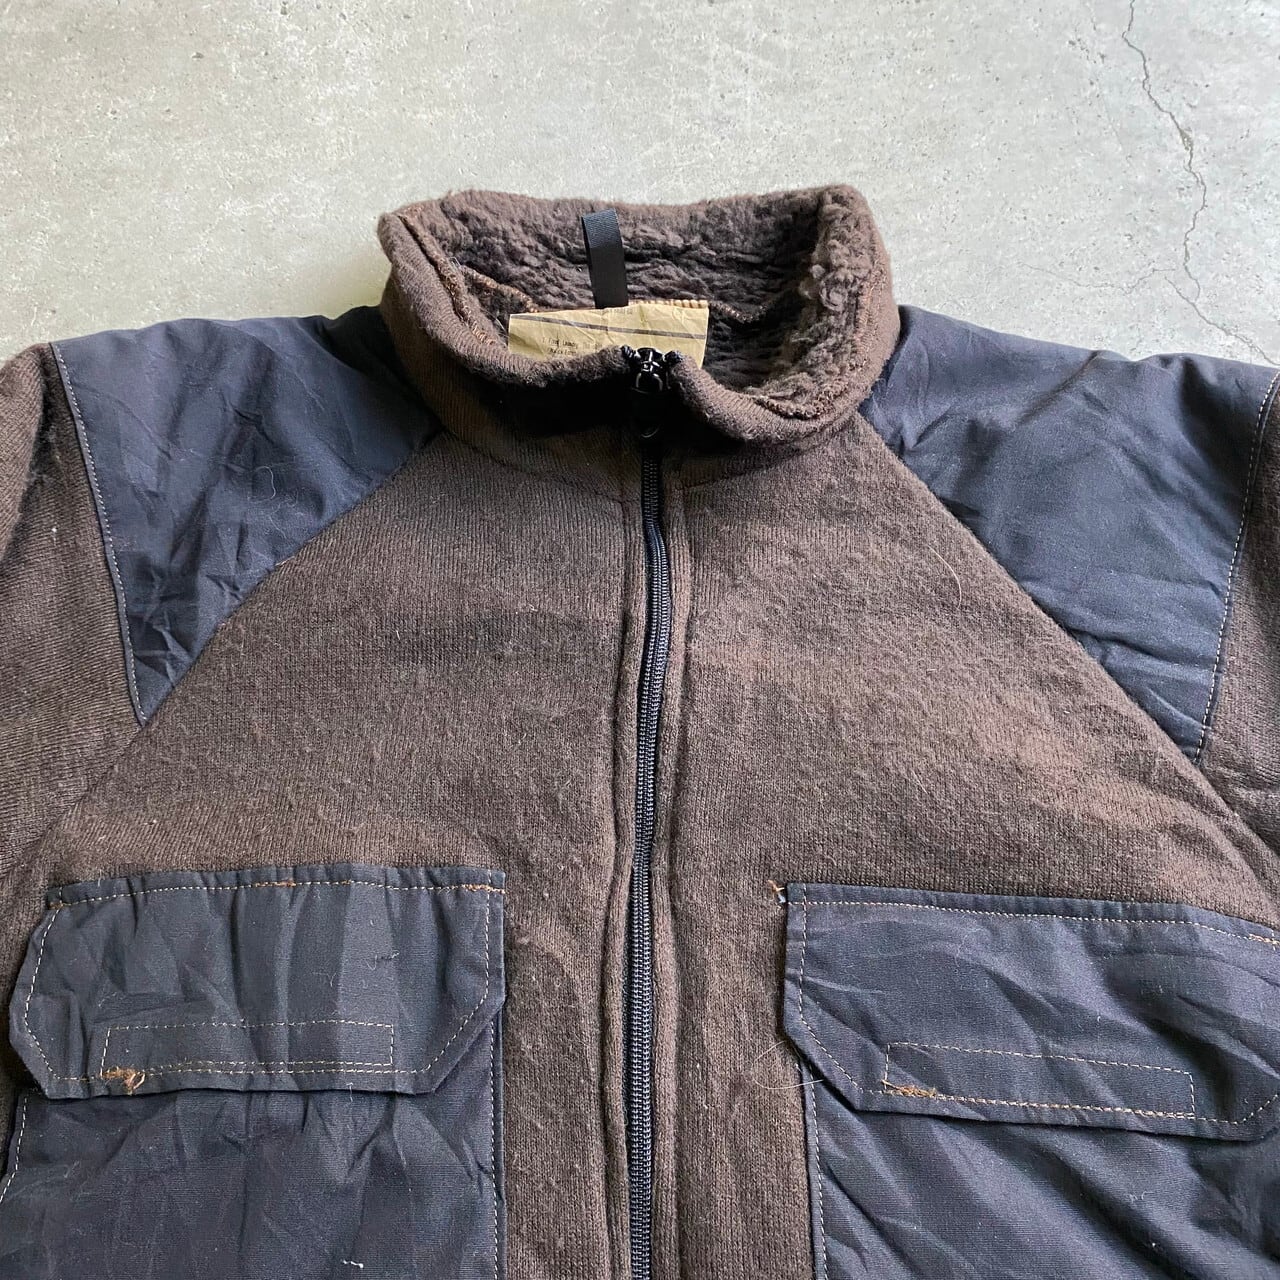 military jacket vintage 90s ヴィンテージ デザイン